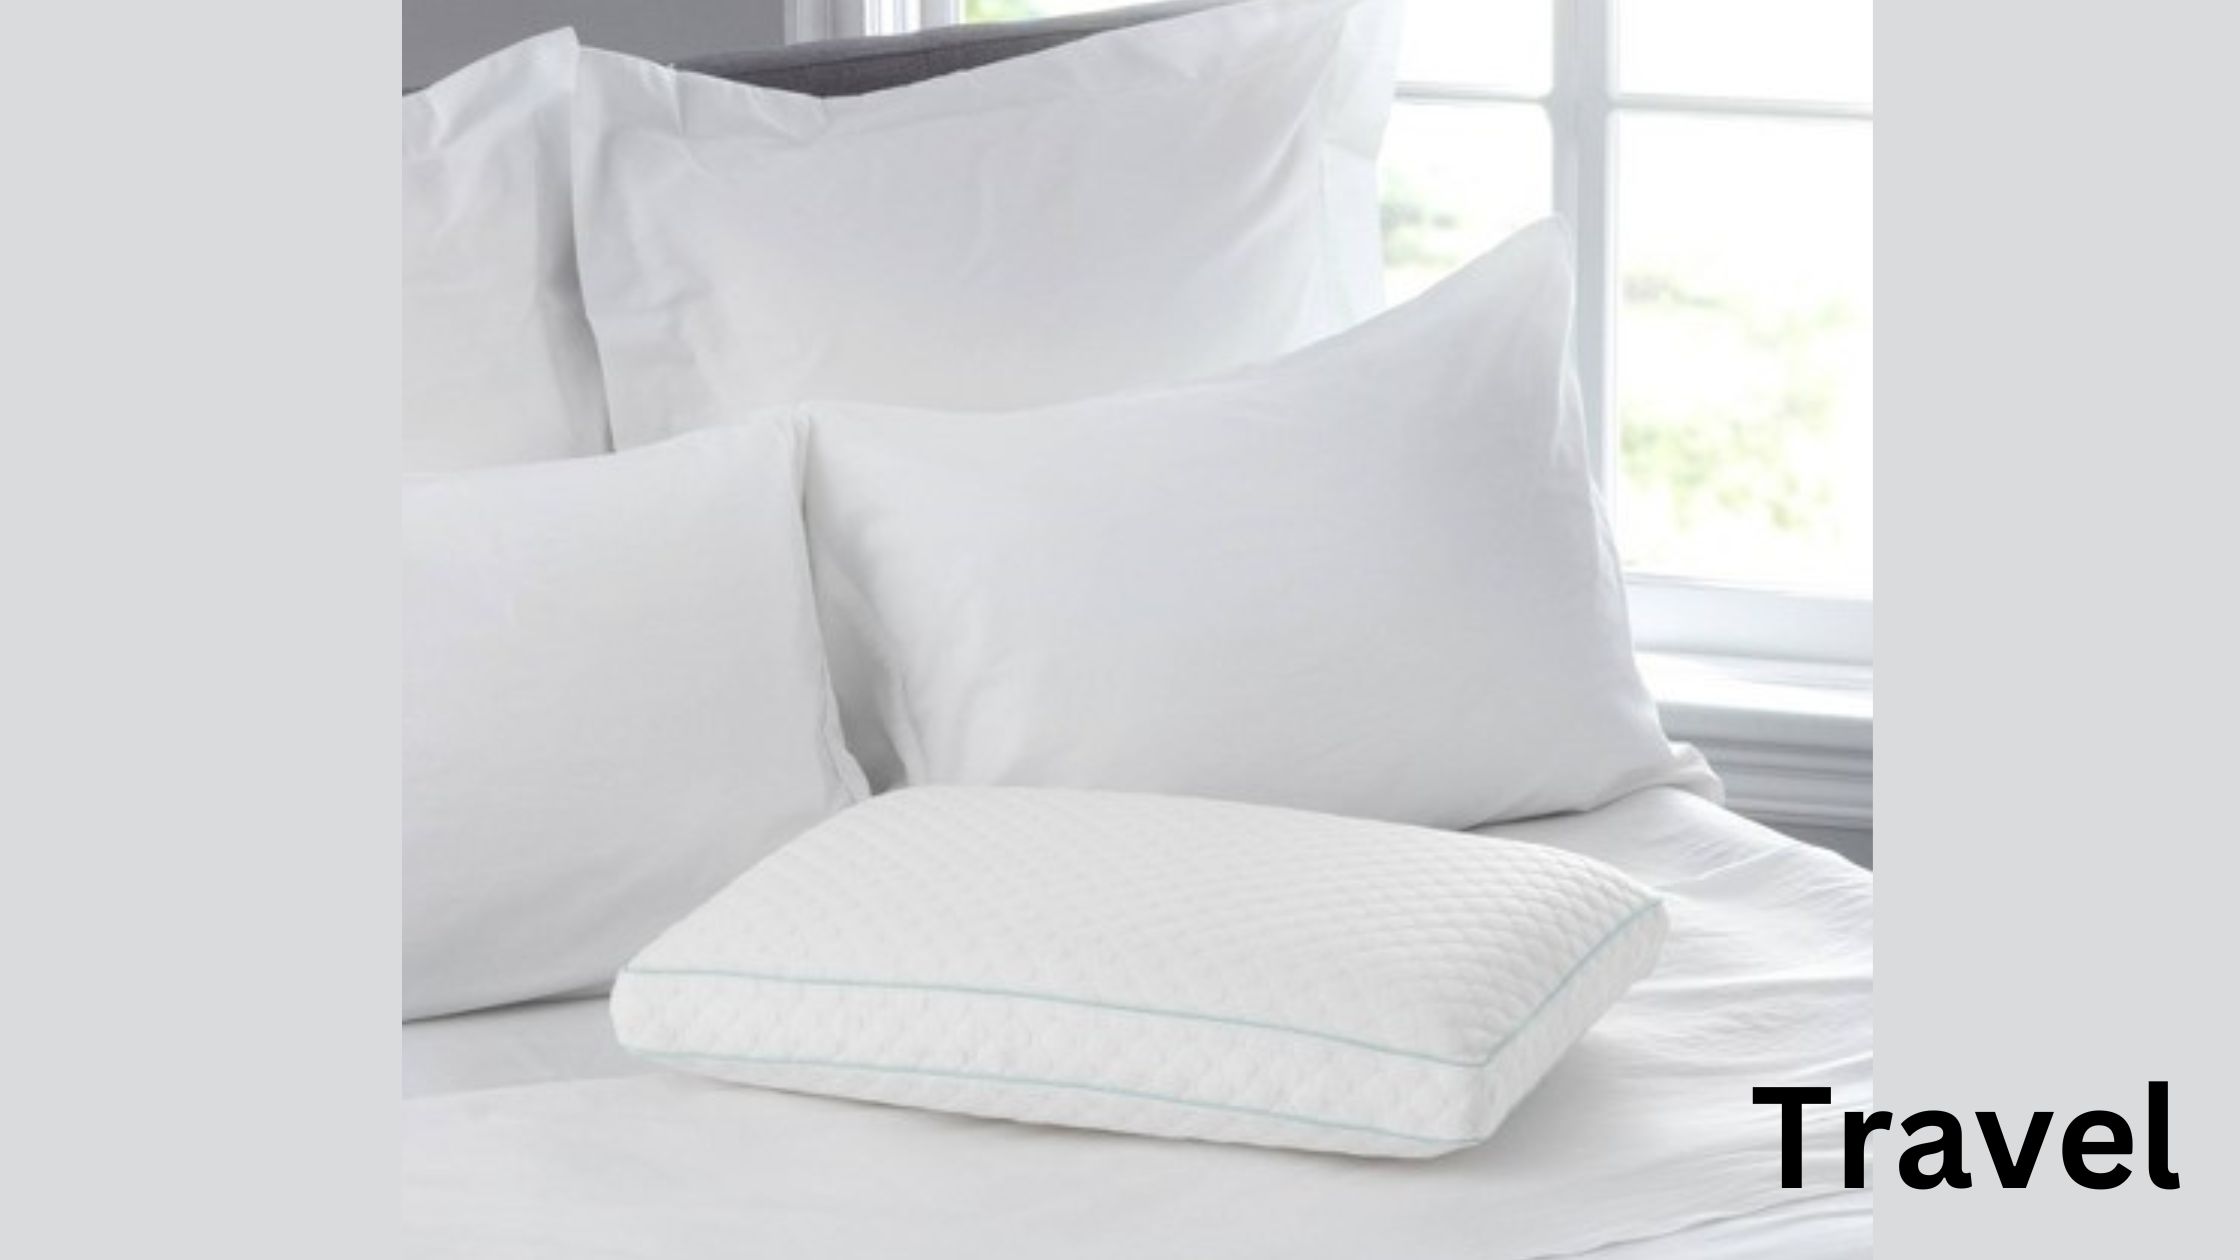 Pillowcases for Travel Size Pillows